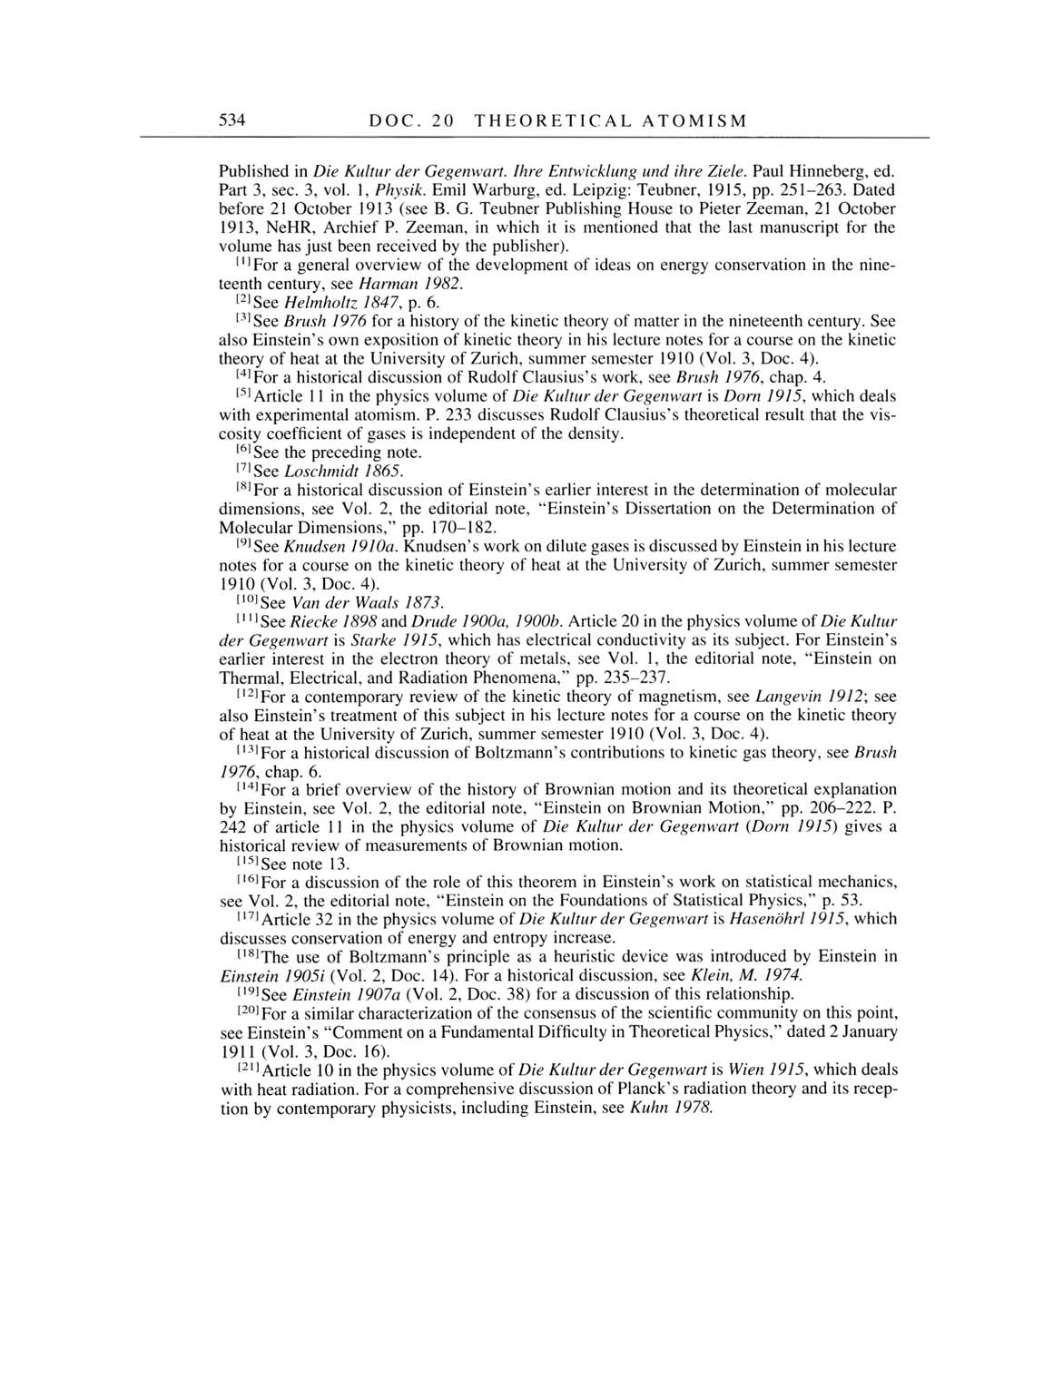 Volume 4: The Swiss Years: Writings 1912-1914 page 534